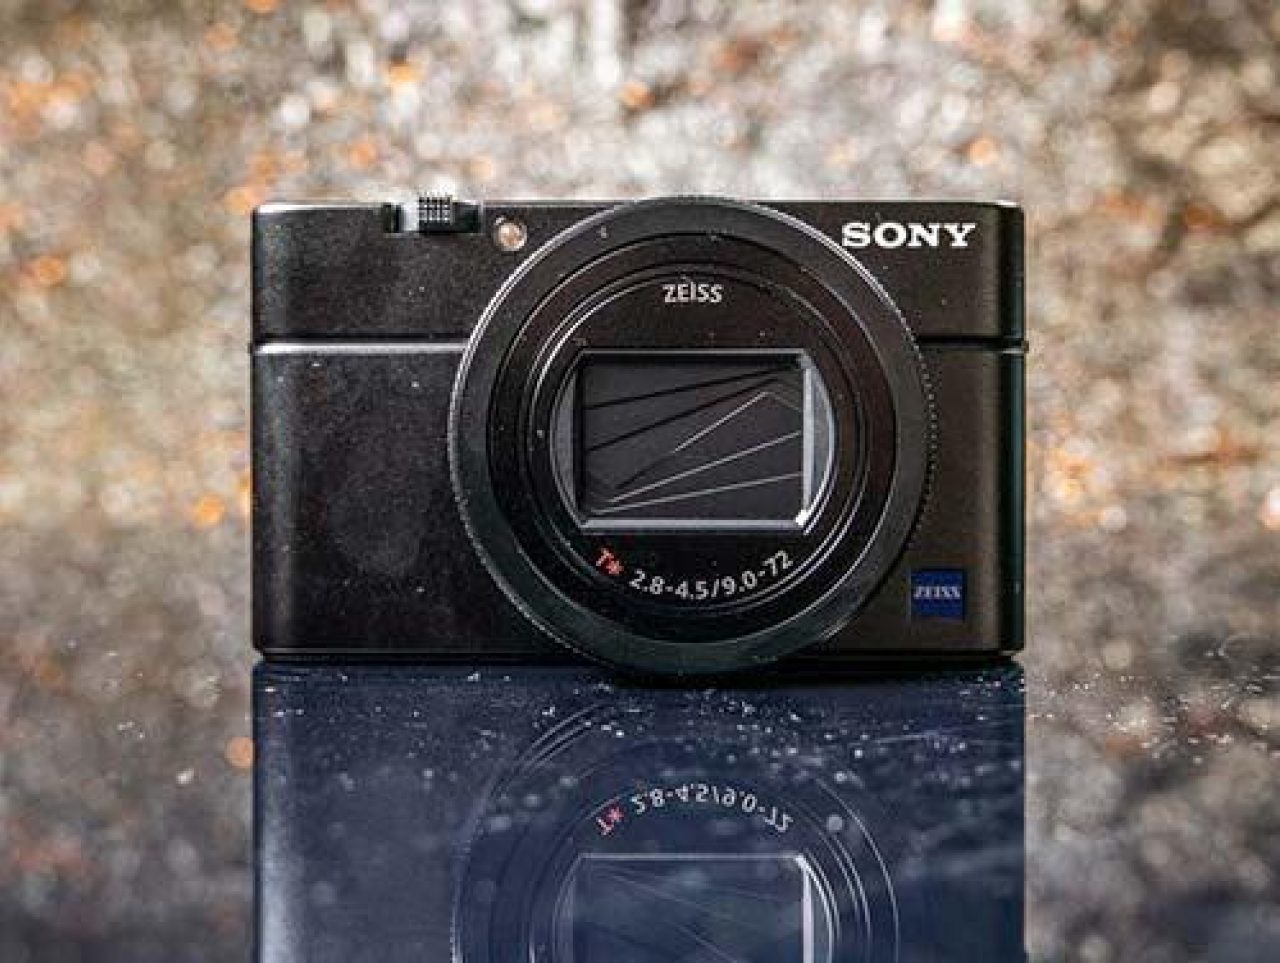 Used Sony Cyber-shot RX100 VII